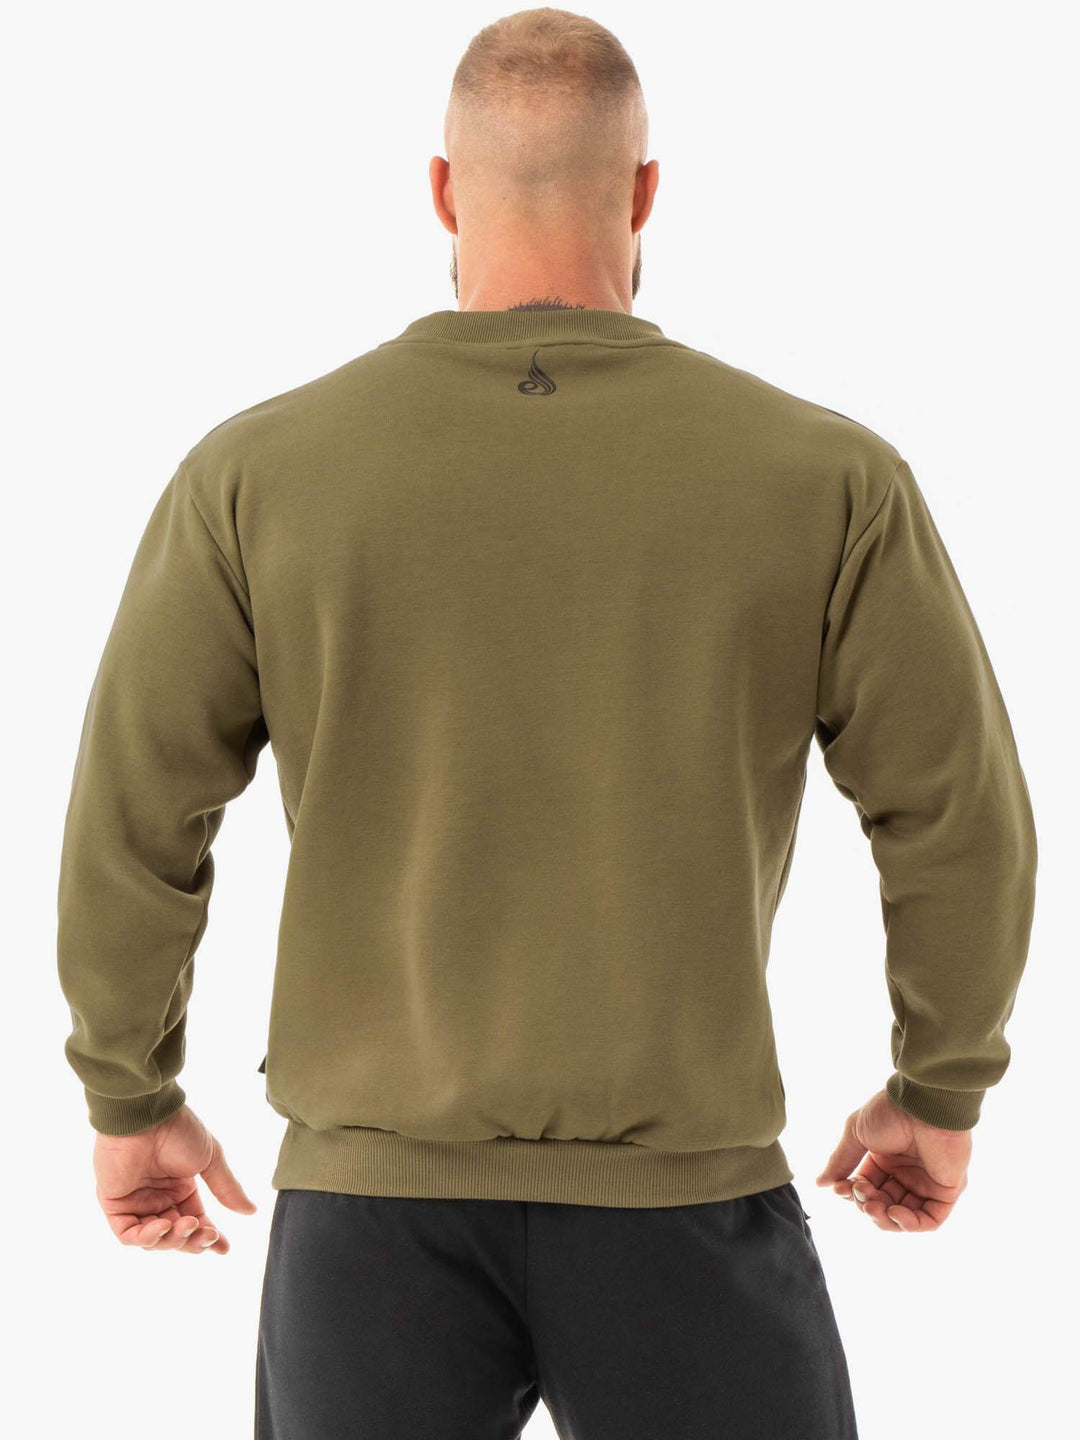 Force Pullover - Khaki Clothing Ryderwear 